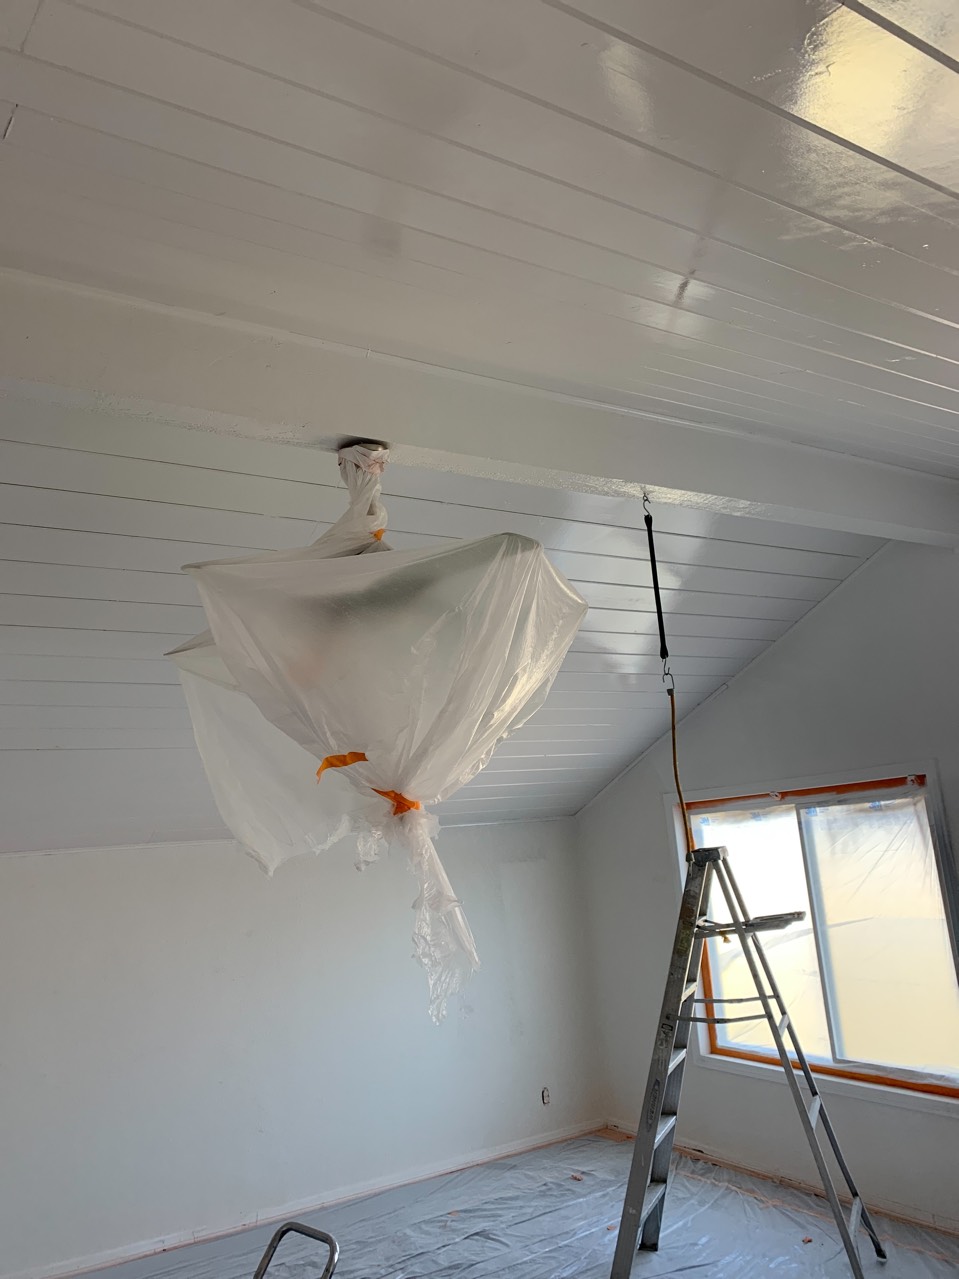 Preparing to paint an interior room in Scripps.